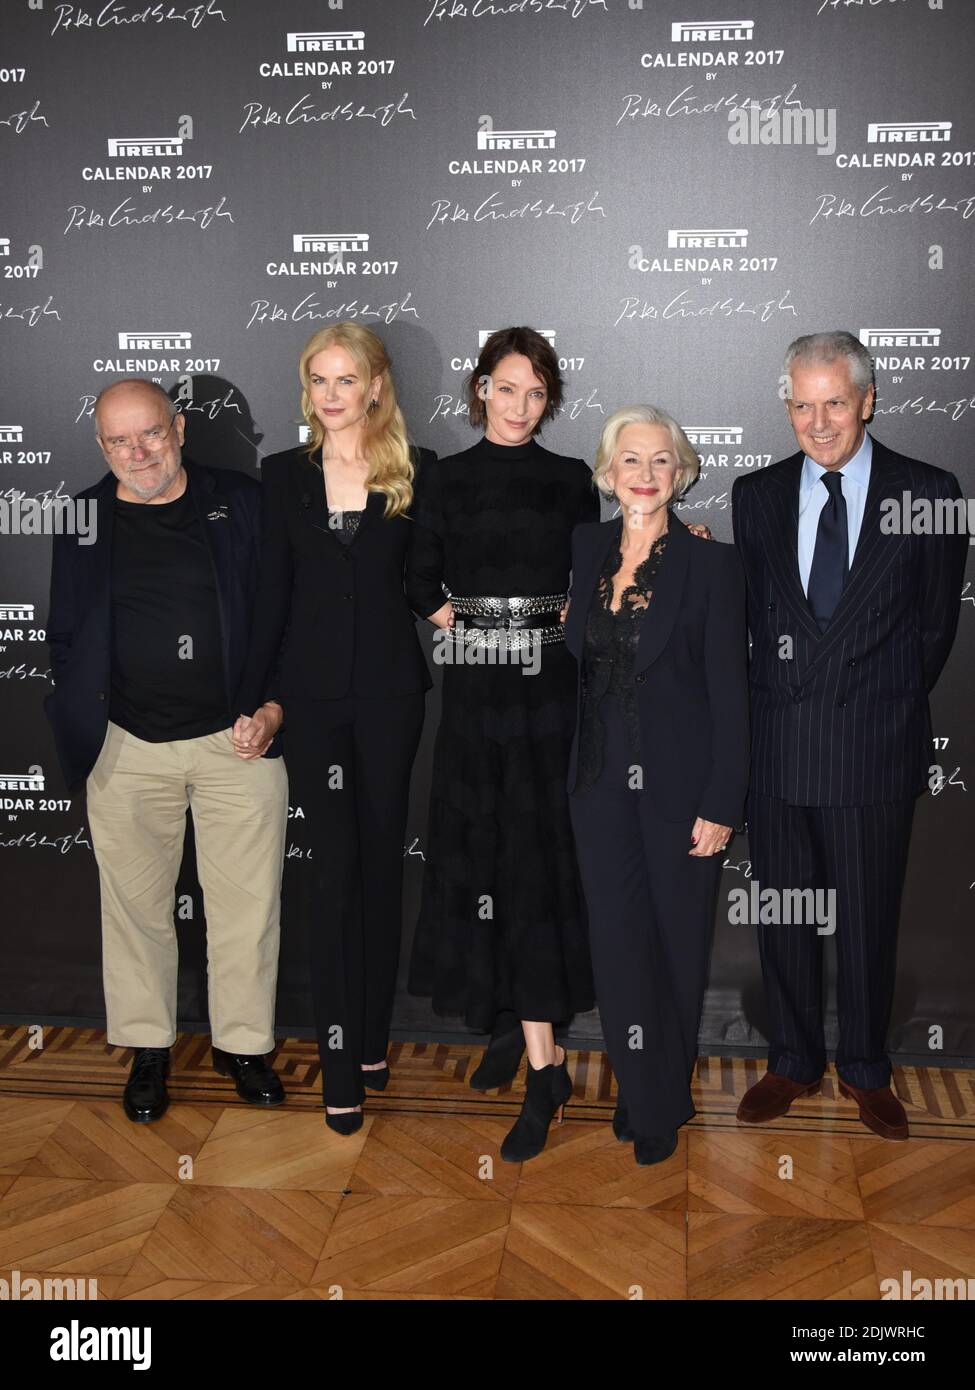 Uma Thurman, Nicole Kidman, Helen Mirren, Peter Lindbergh and Marco Tronchetti Provera (CEO Pirelli) attending the press conference for the 2017 Pirelli Calendar by Peter Lindbergh at Hotel Salomon de Rothschild in Paris, France on November 29, 2016. Photo by Alban Wyters/ABACAPRESS.COM Stock Photo